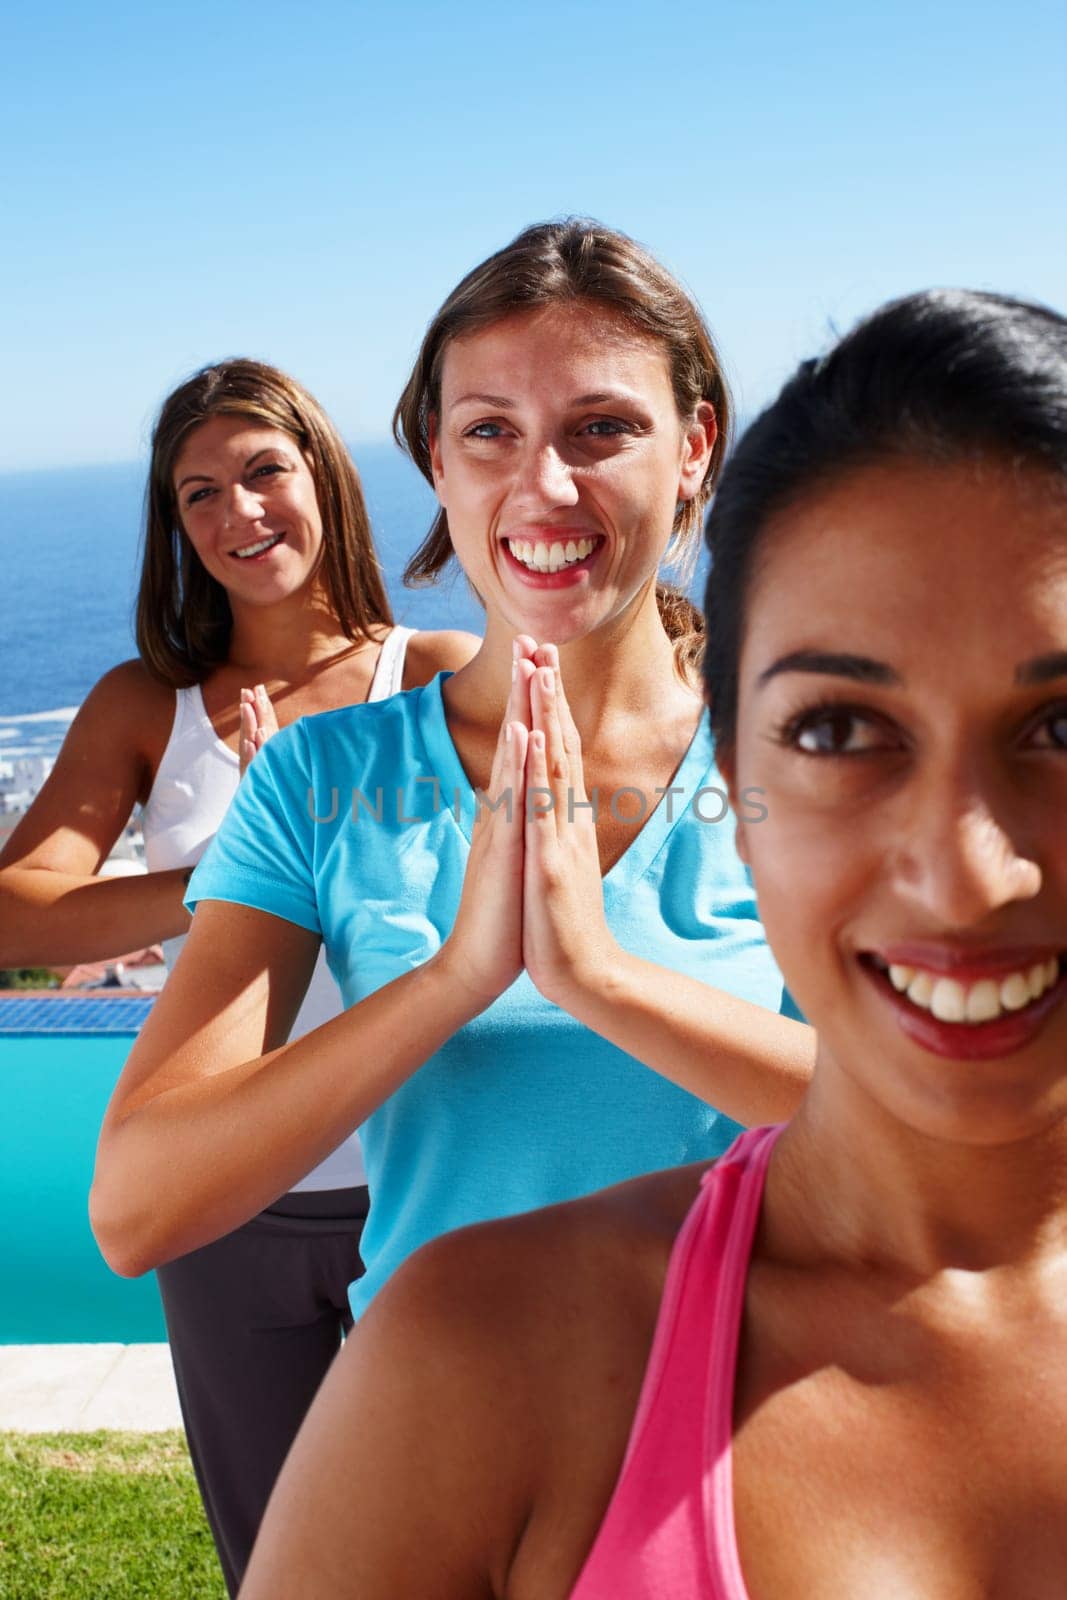 Ocean, yoga and namaste with group of women on grass together for fitness, exercise or mindfulness resort. Nature, relax and happy friends at outdoor holistic retreat for wellness, zen and sunshine by YuriArcurs